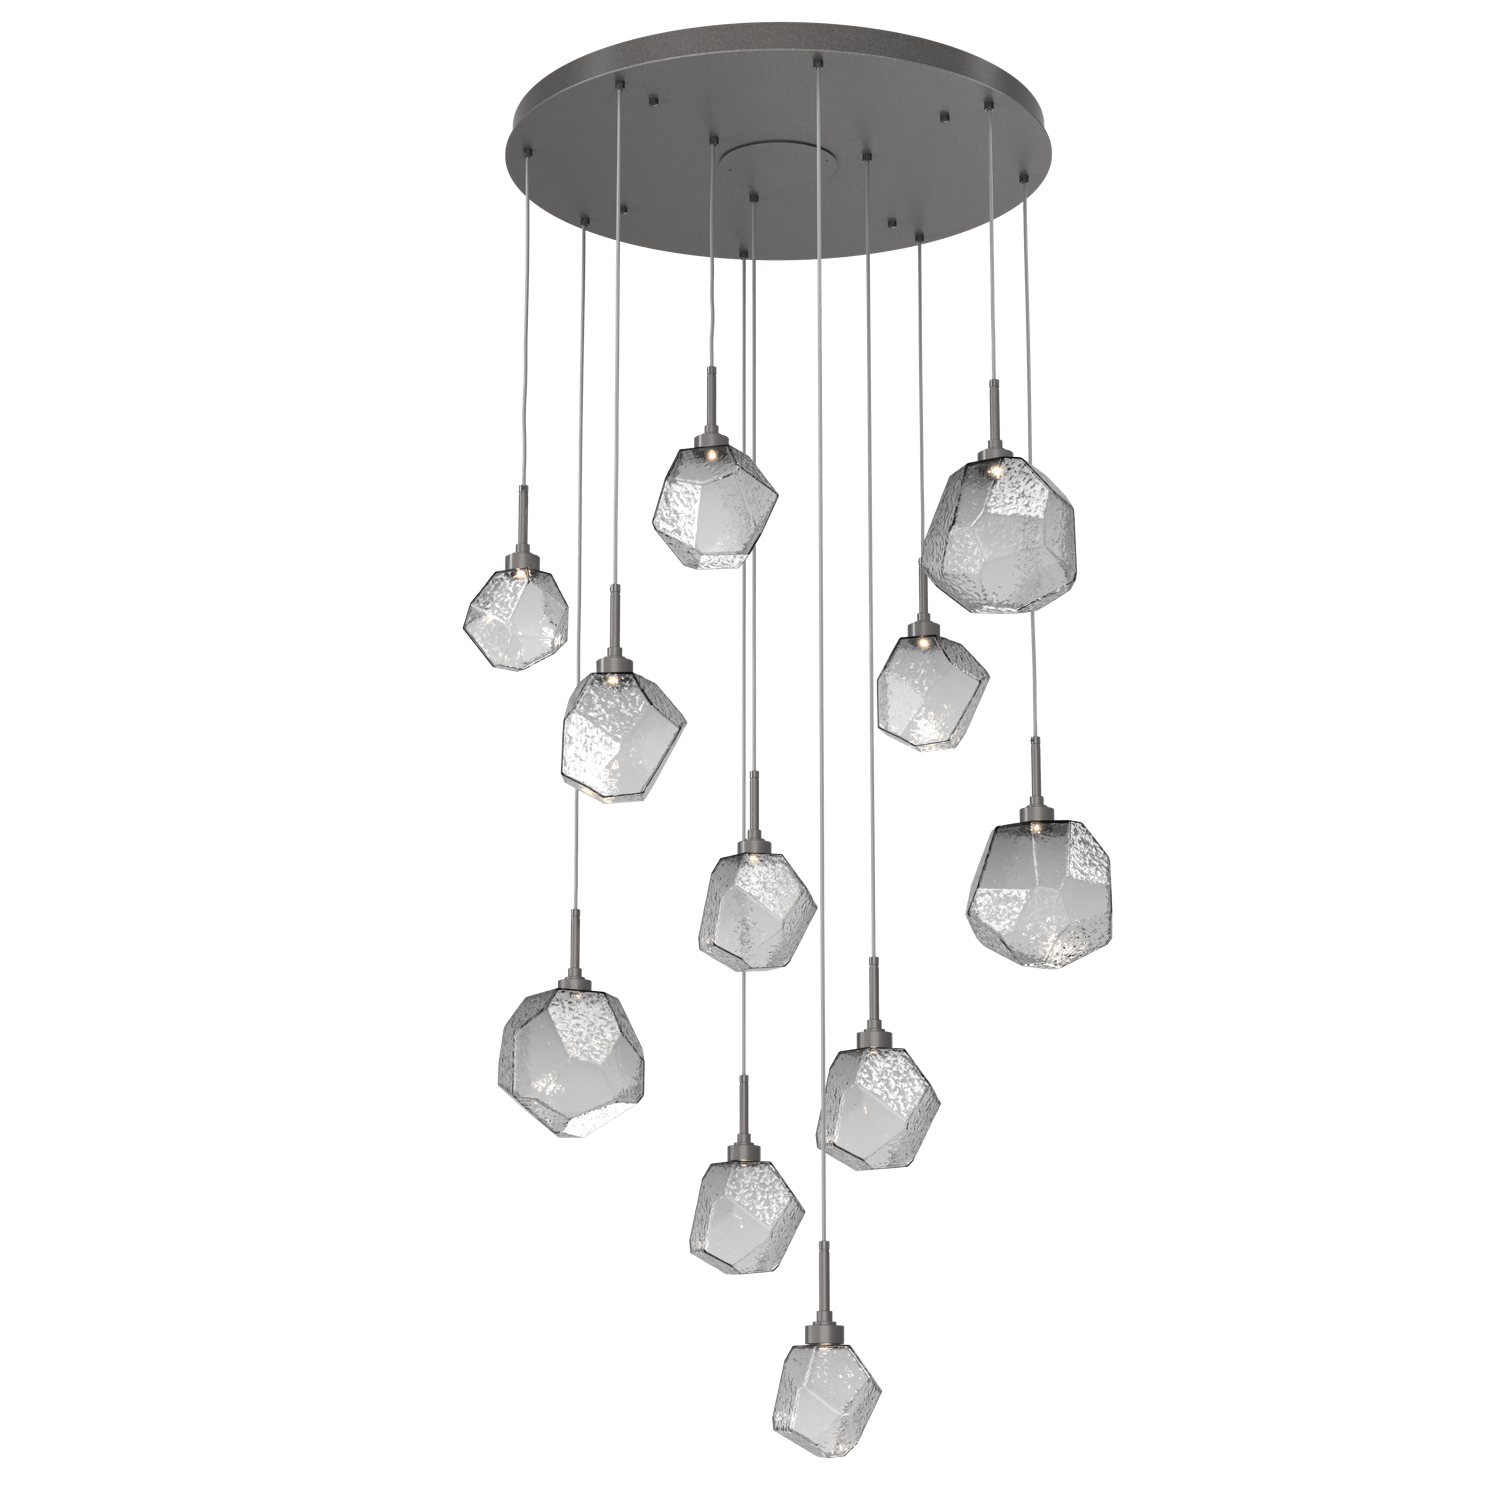 CHB0039-11-GP-S-Hammerton-Studio-Gem-11-light-round-pendant-chandelier-with-graphite-finish-and-smoke-blown-glass-shades-and-LED-lamping